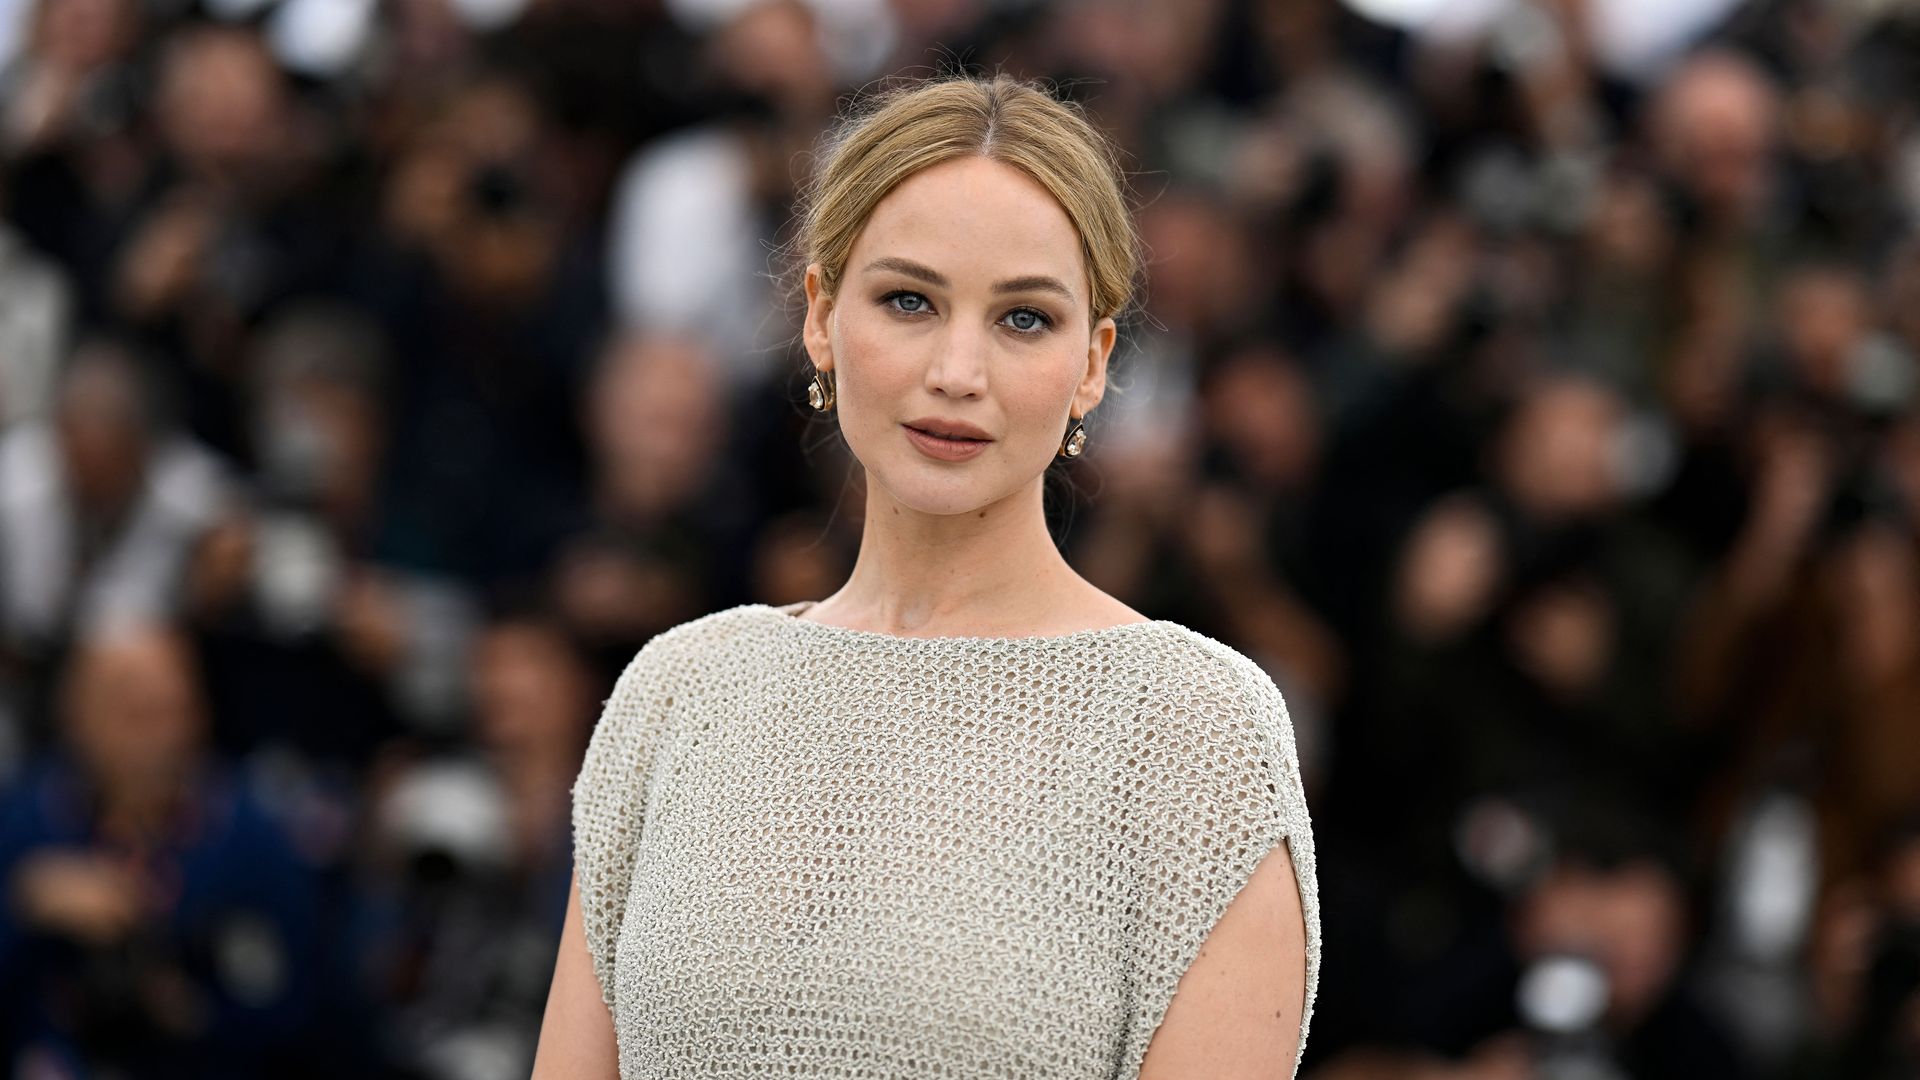 Jennifer Lawrence poses during a photocall for the film "Bread and Roses" at the 76th edition of the Cannes Film Festival in Cannes, southern France, on May 21, 2023